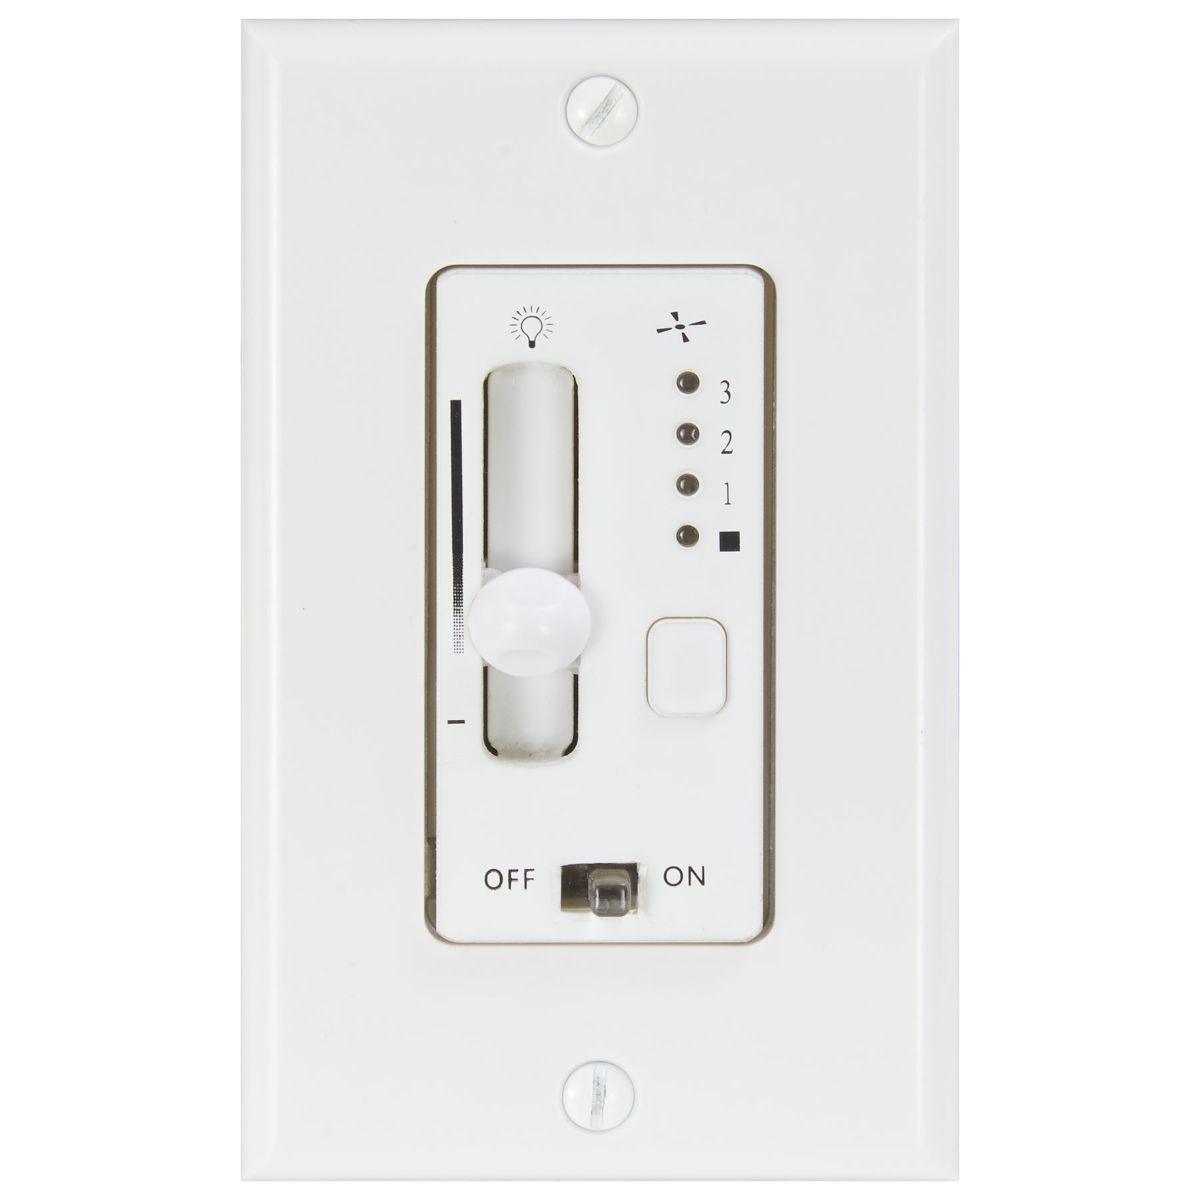 3-Speed Dimmer Ceiling Fan Control With Wallplate Switch, White Finish